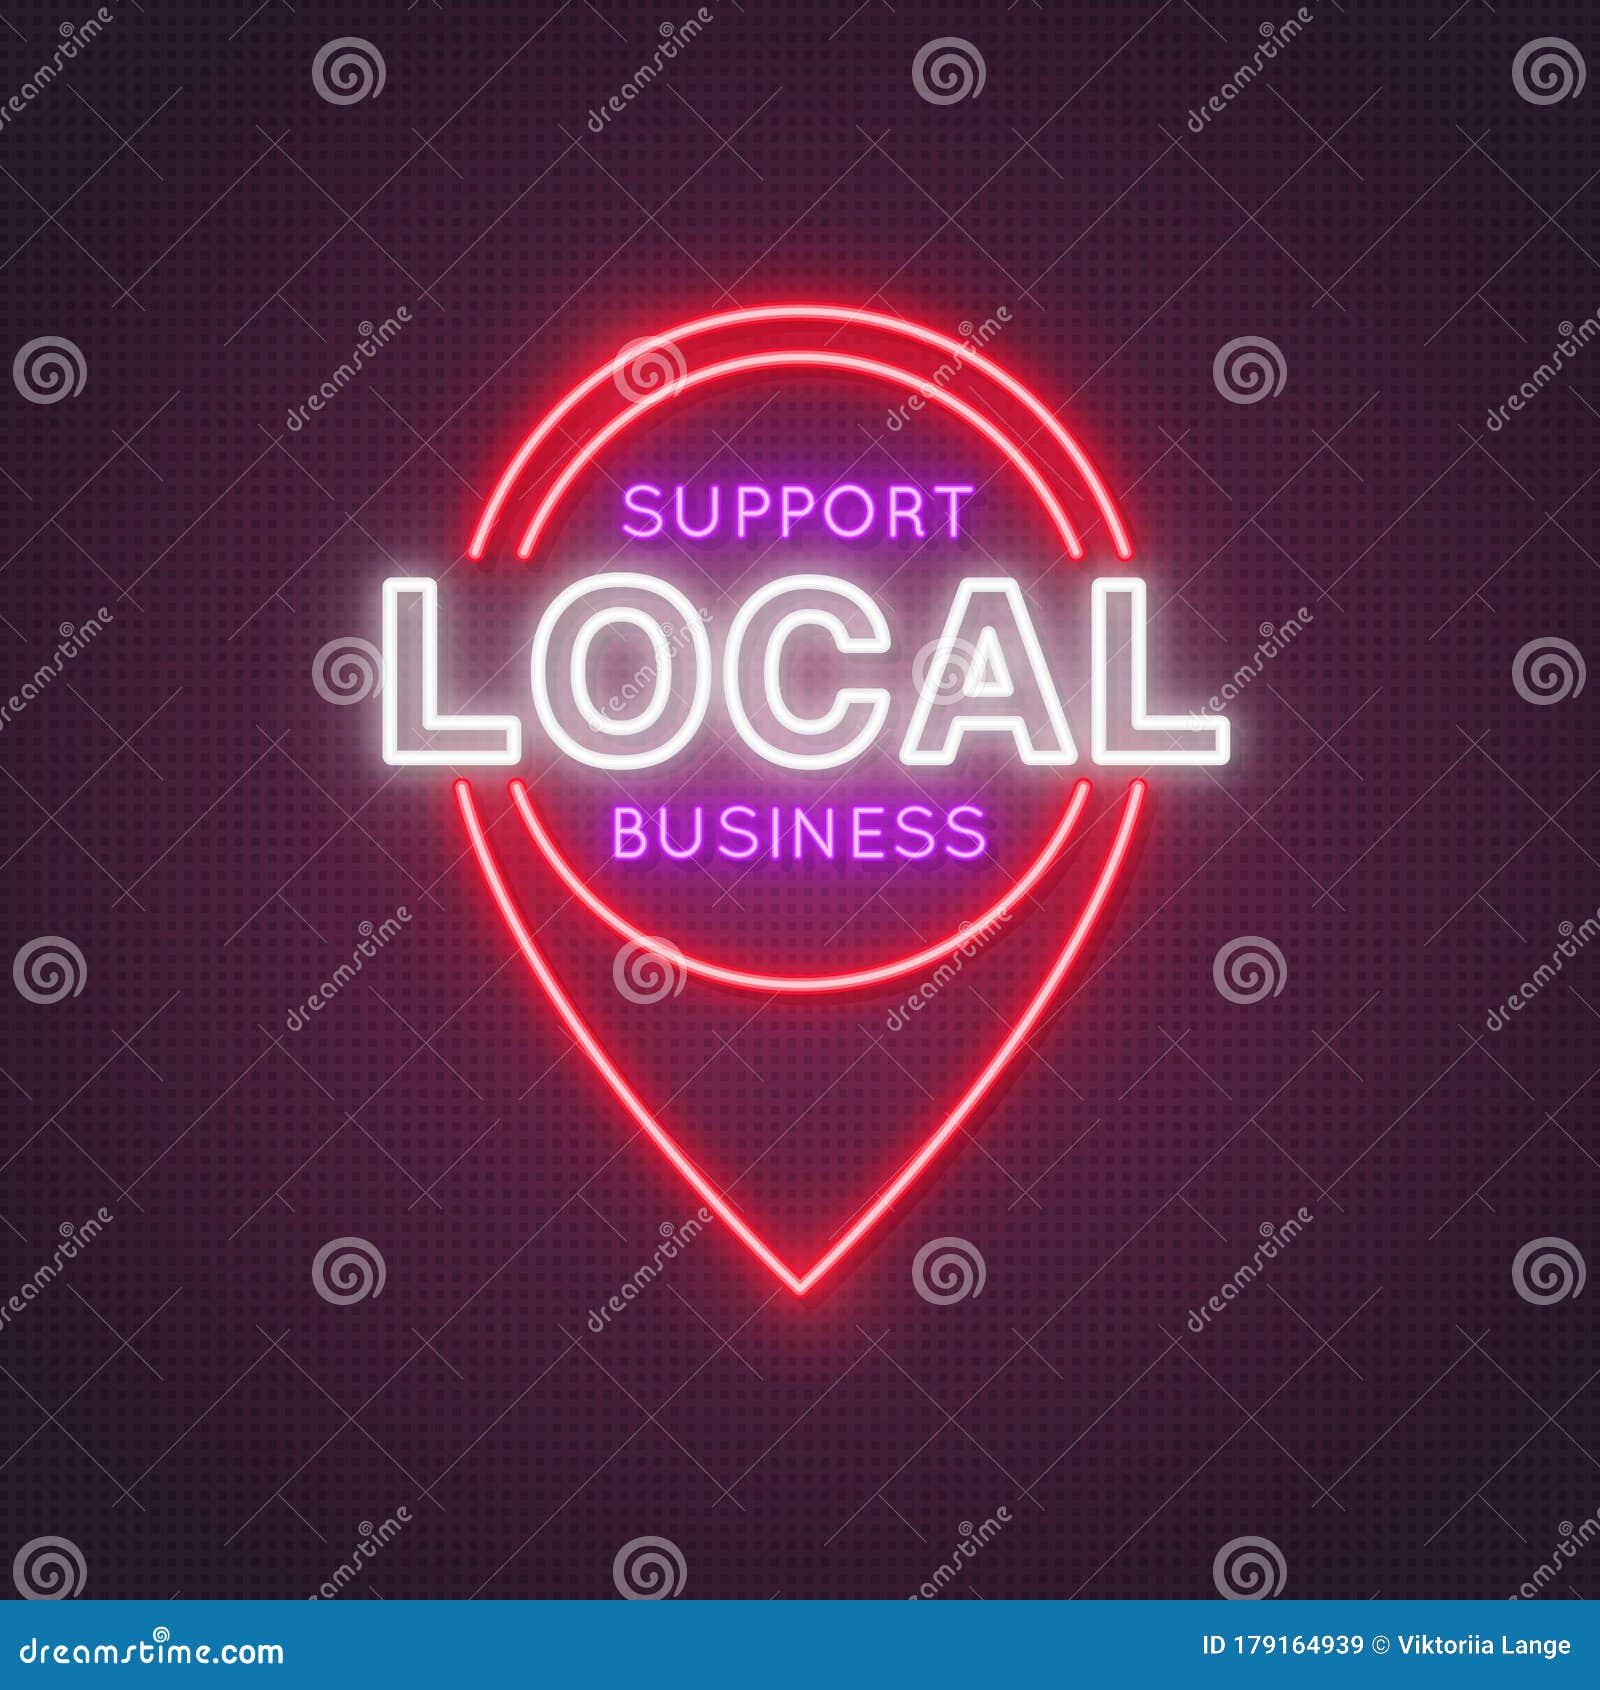 neon location icon with the words support local business.